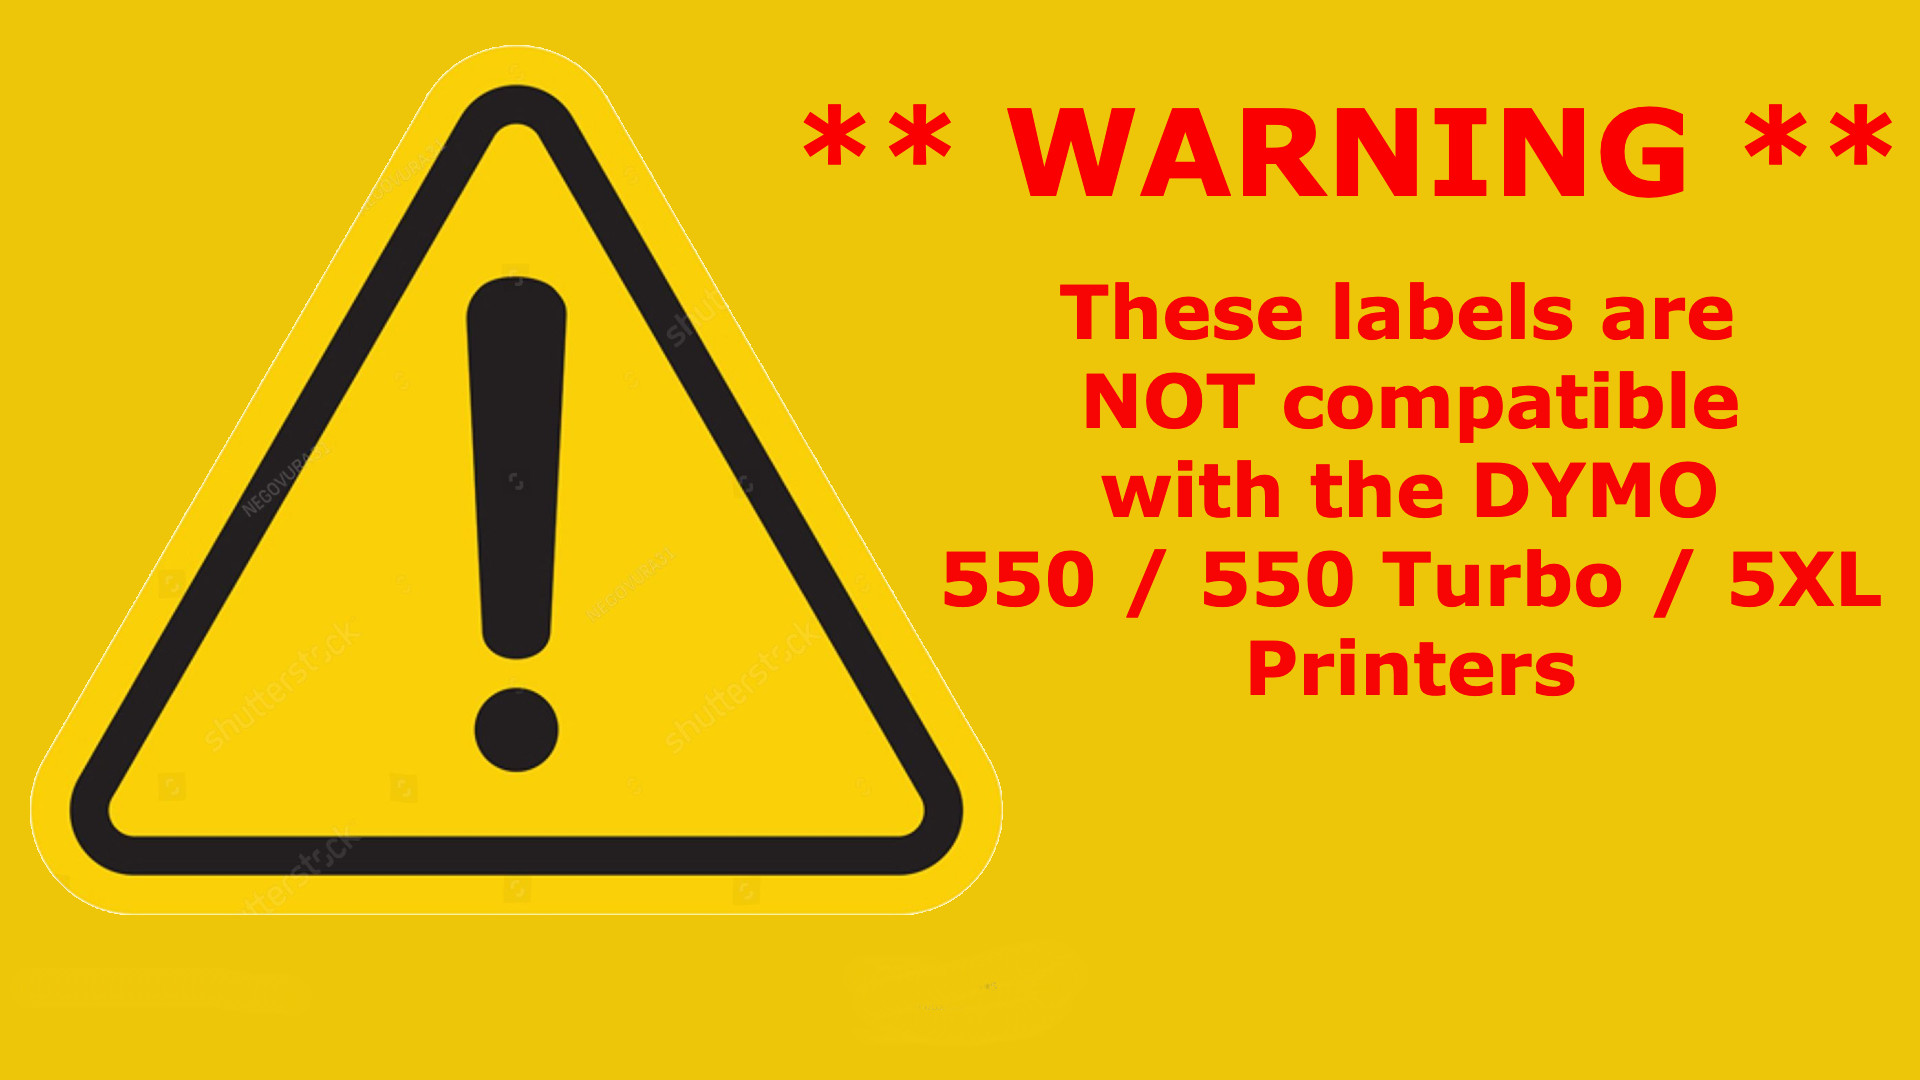 Warning these labels are not compatible with the Dymo 550 550turbo or 5XL printers